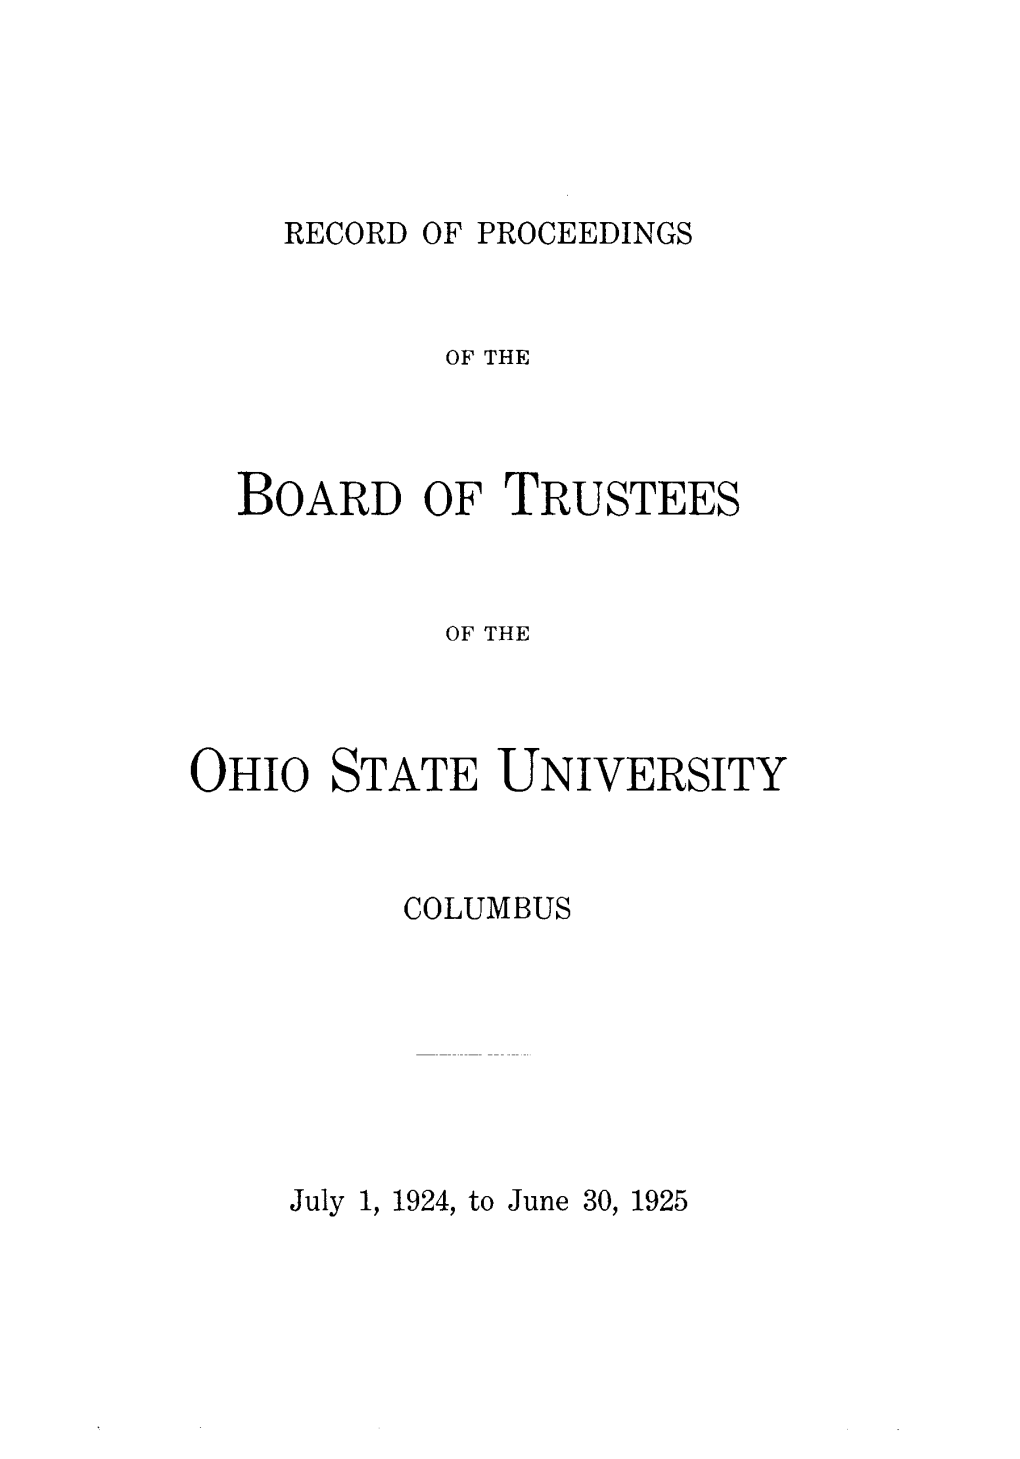 Proceedings of the Board of Trustees the Ohio State University